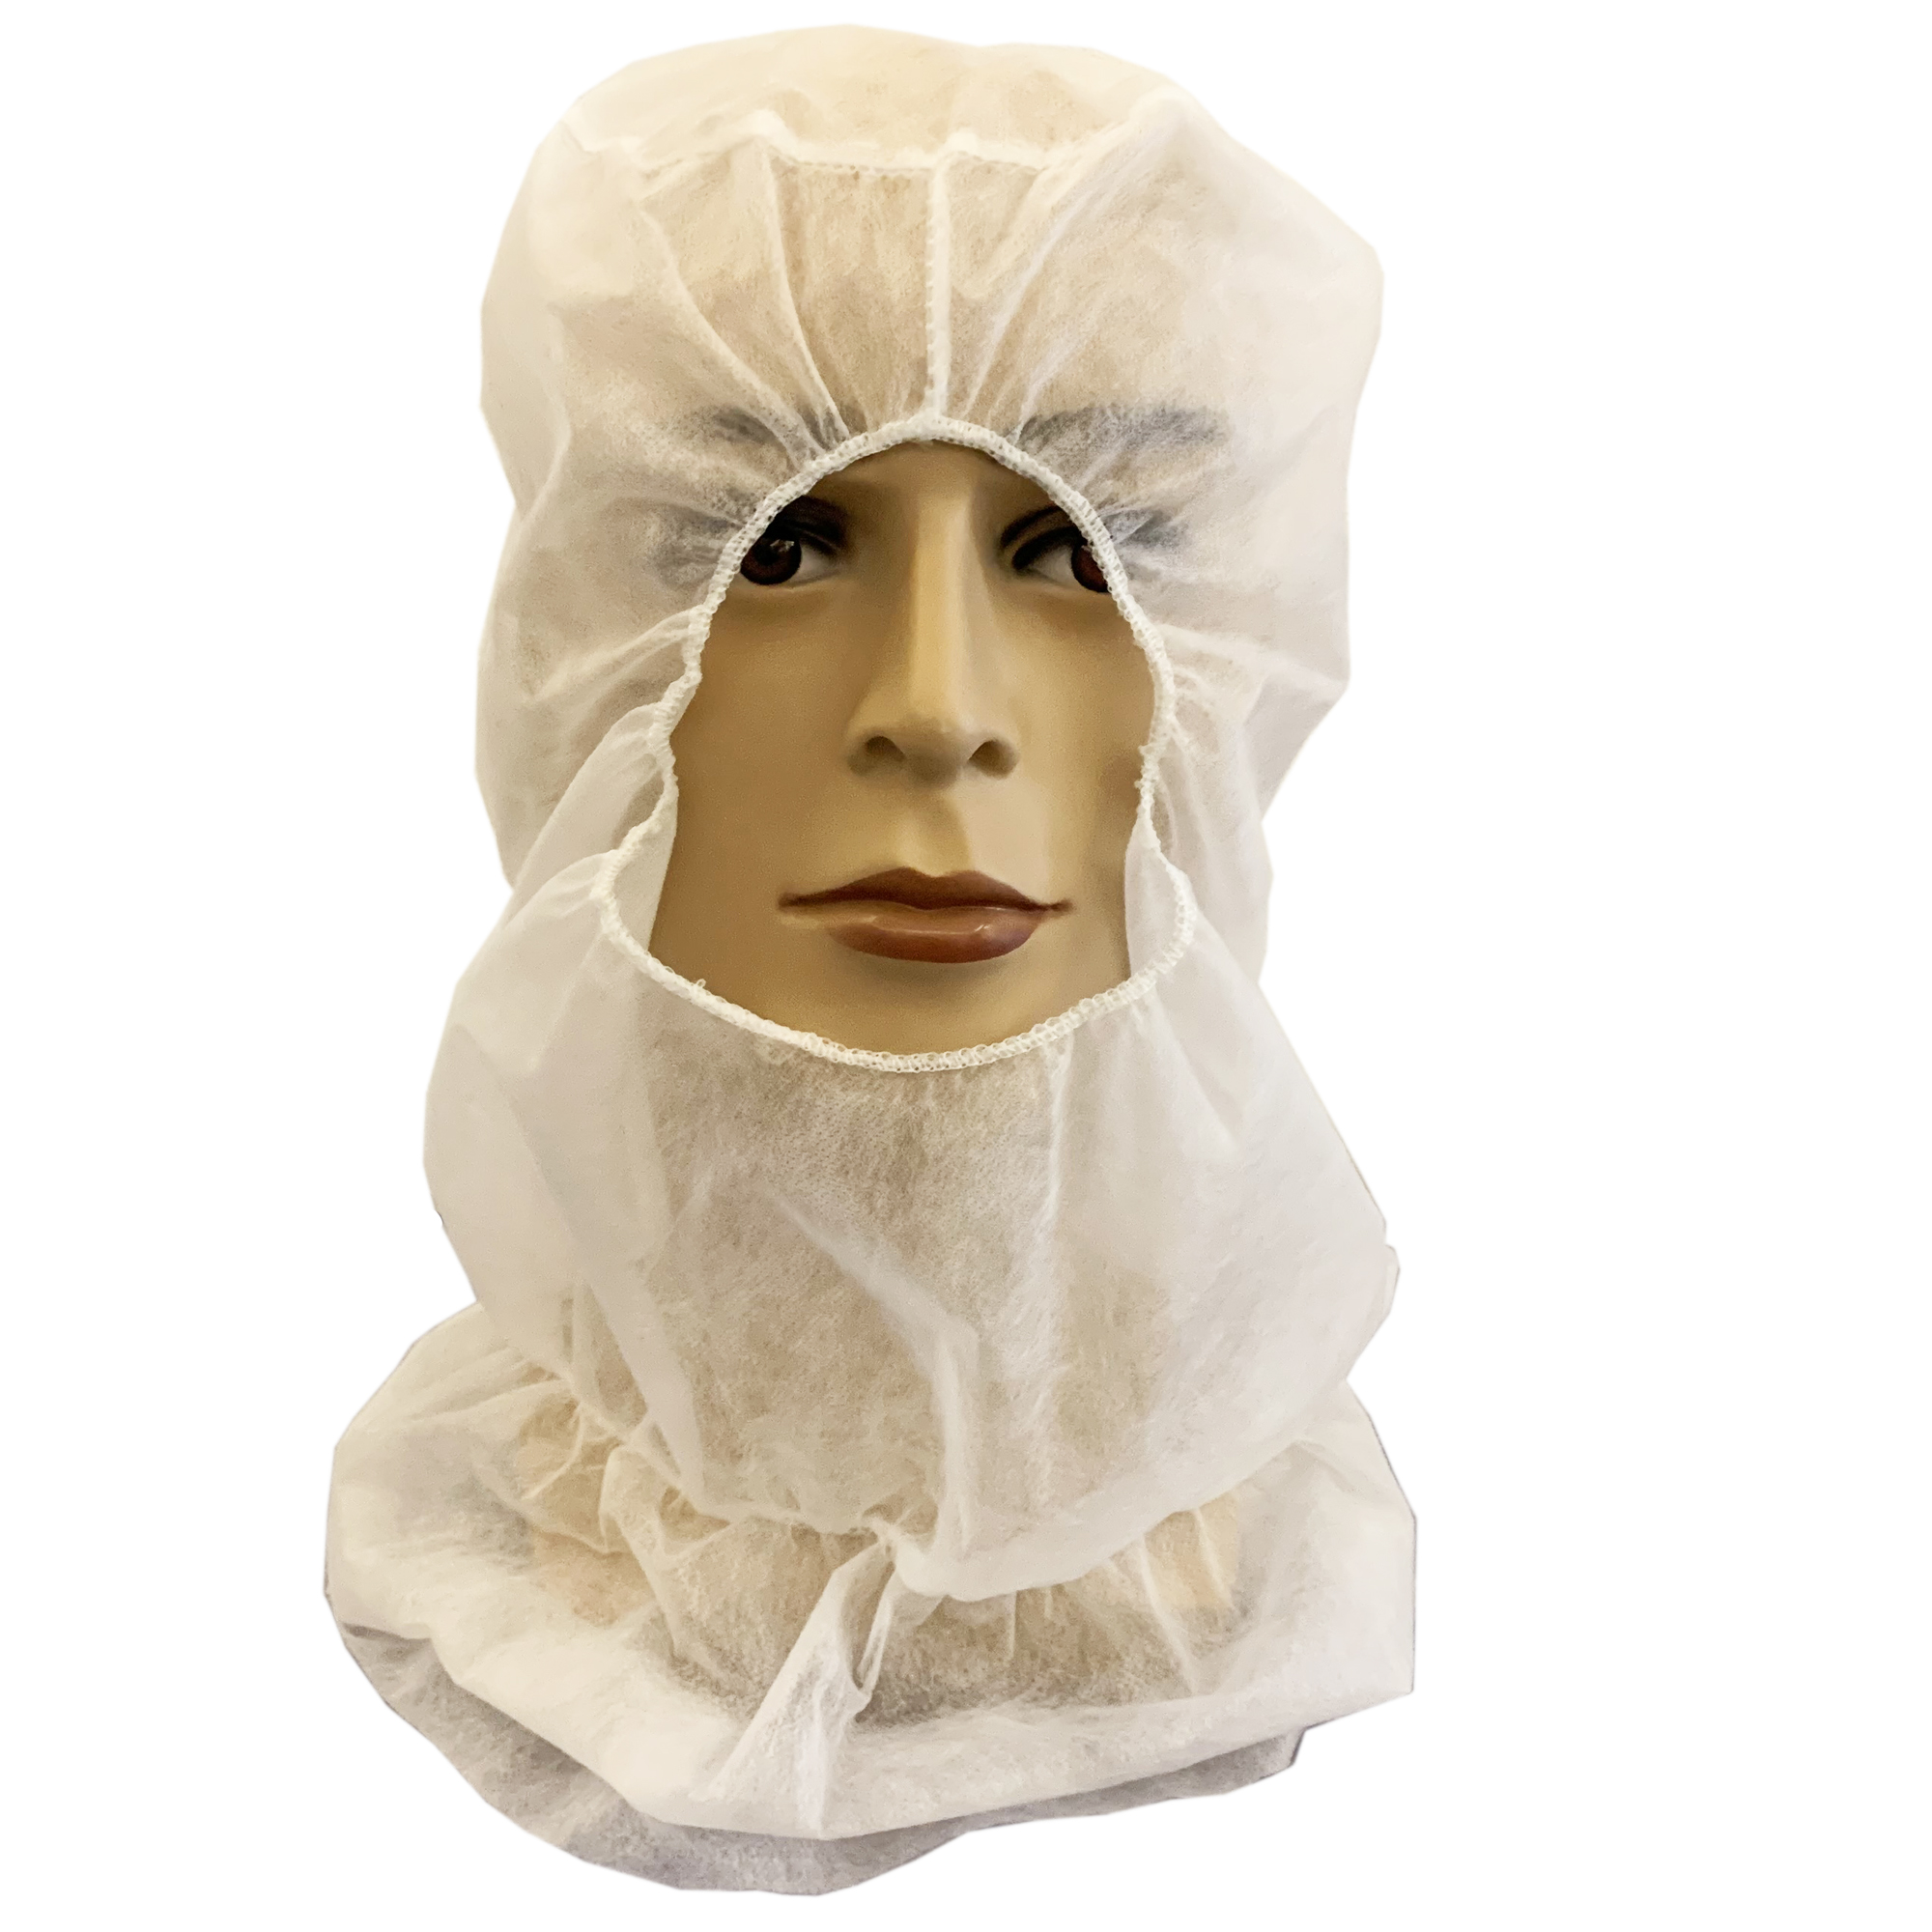 Disposable Nonwoven Head Cover for Workers